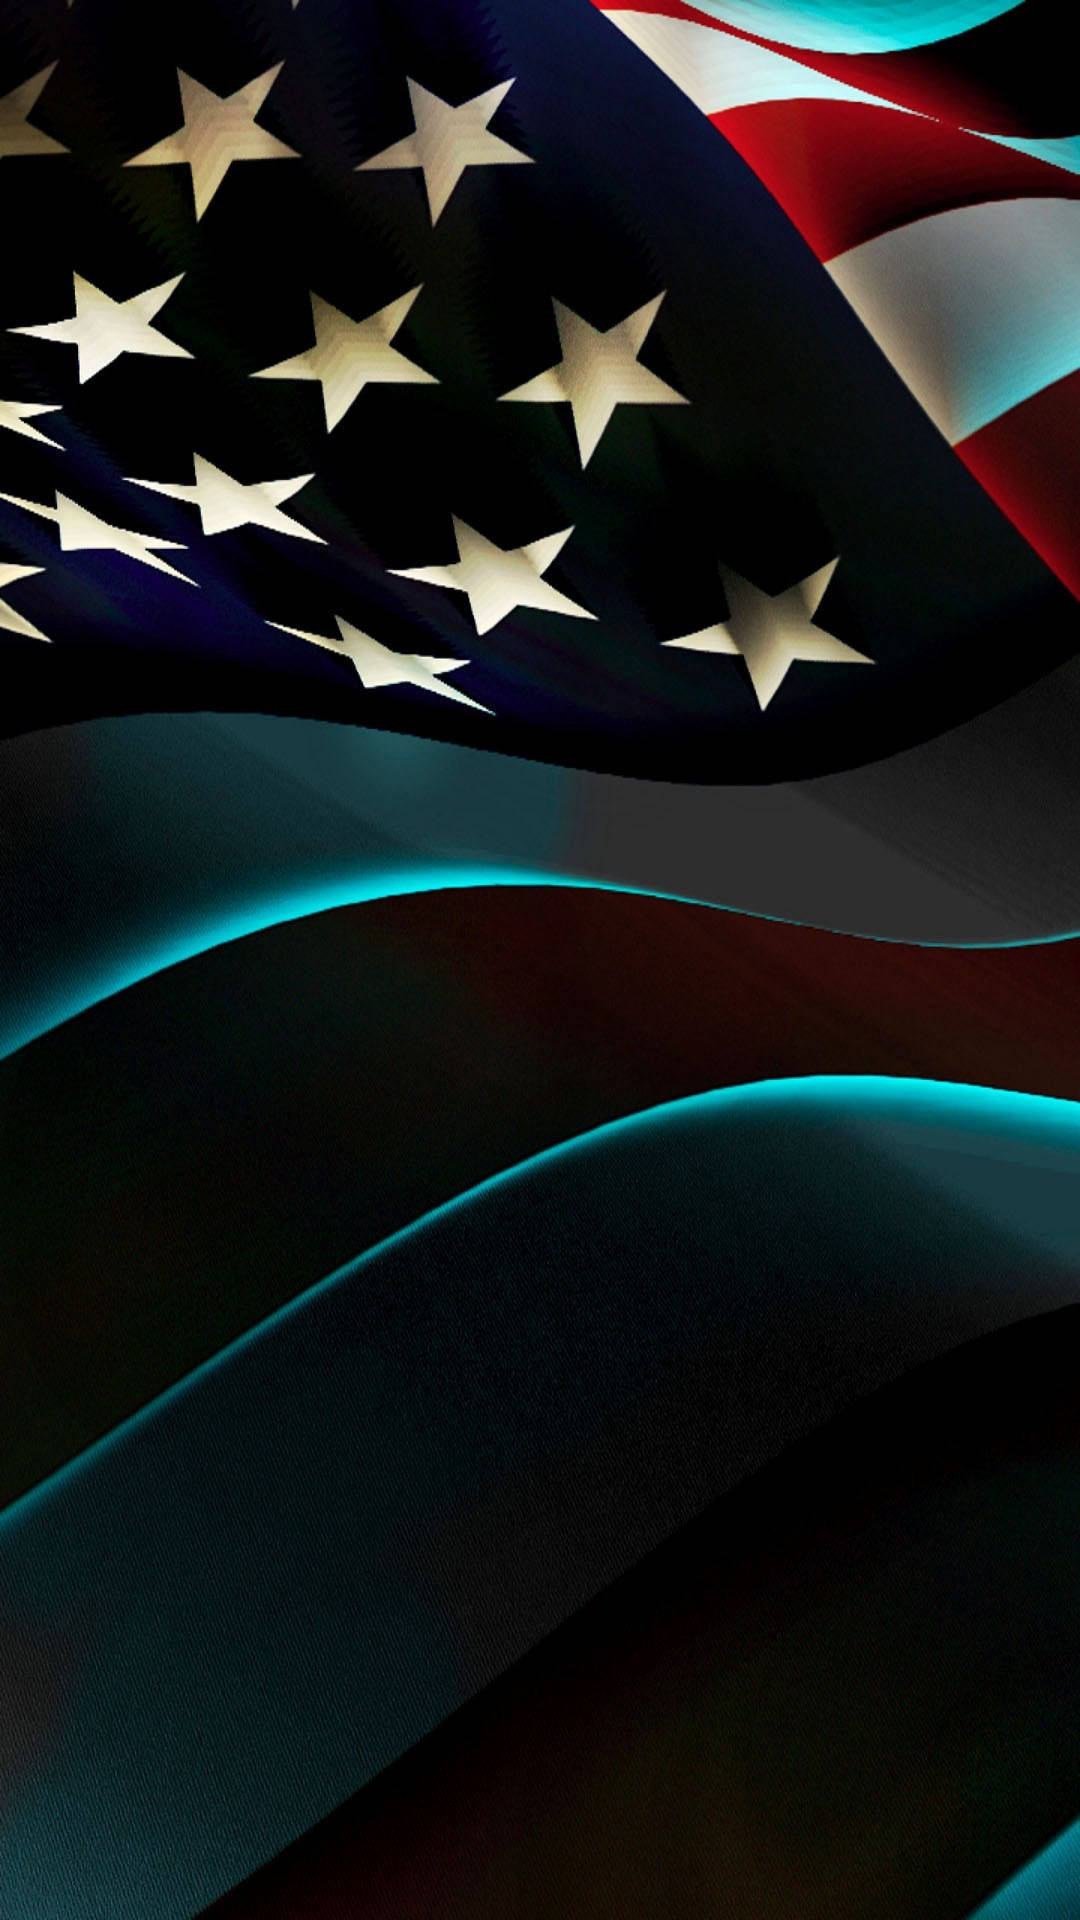 Teal Effects On Flag Of America Iphone Wallpaper